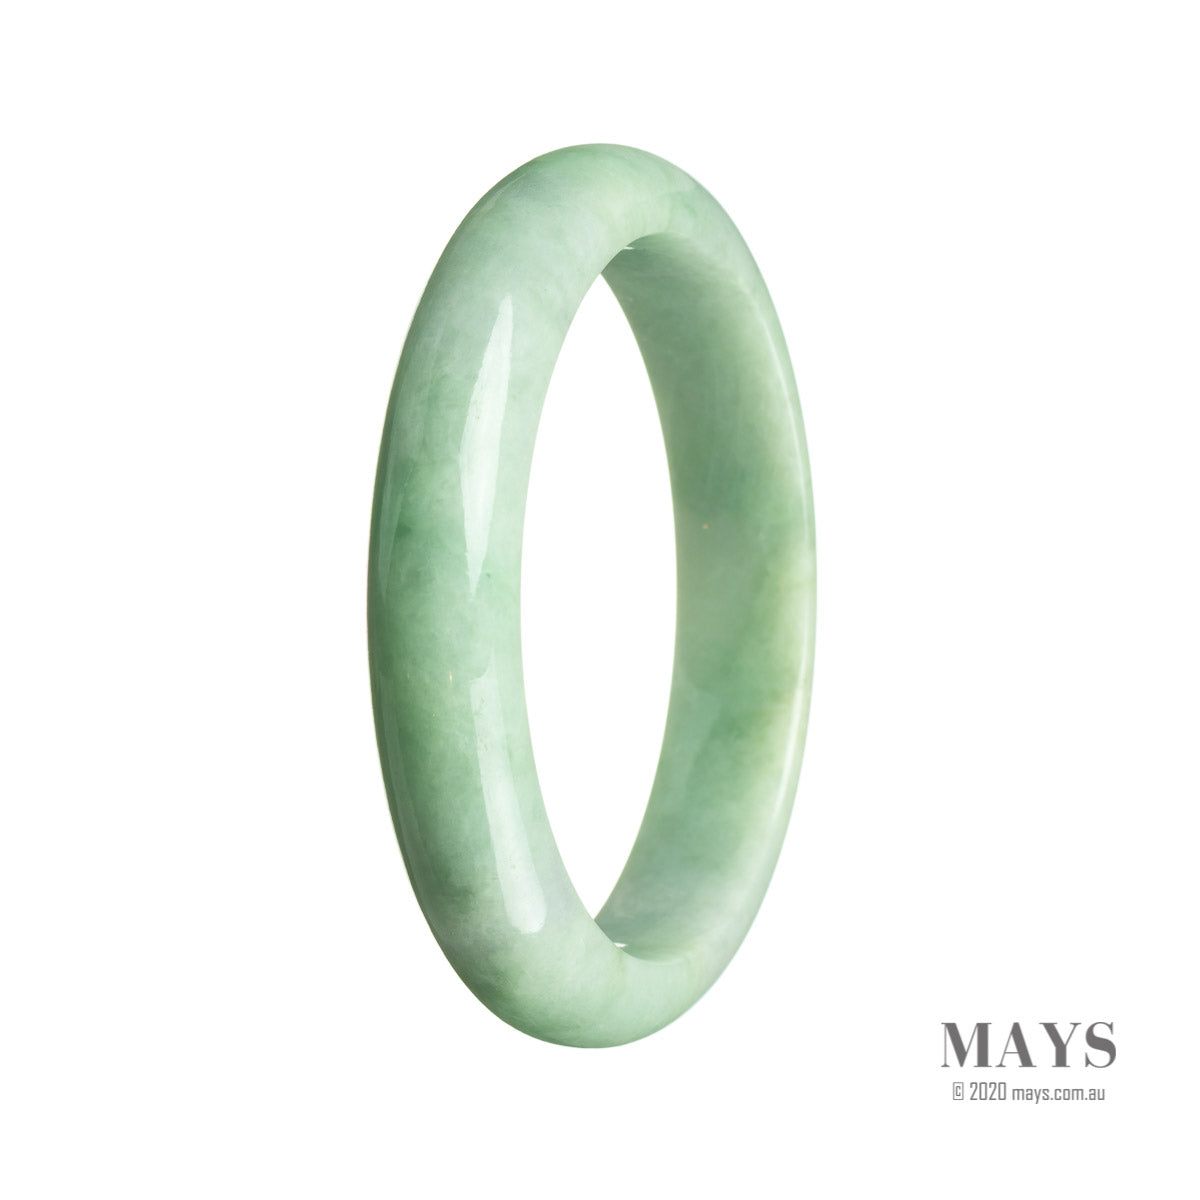 A close-up image of a beautiful green jade bangle with a semi-round shape, measuring 59mm in diameter. The jade stone is genuine and sourced from Burma, showcasing its natural beauty. Crafted with precision, this bangle is a stunning accessory that adds elegance and uniqueness to any outfit.